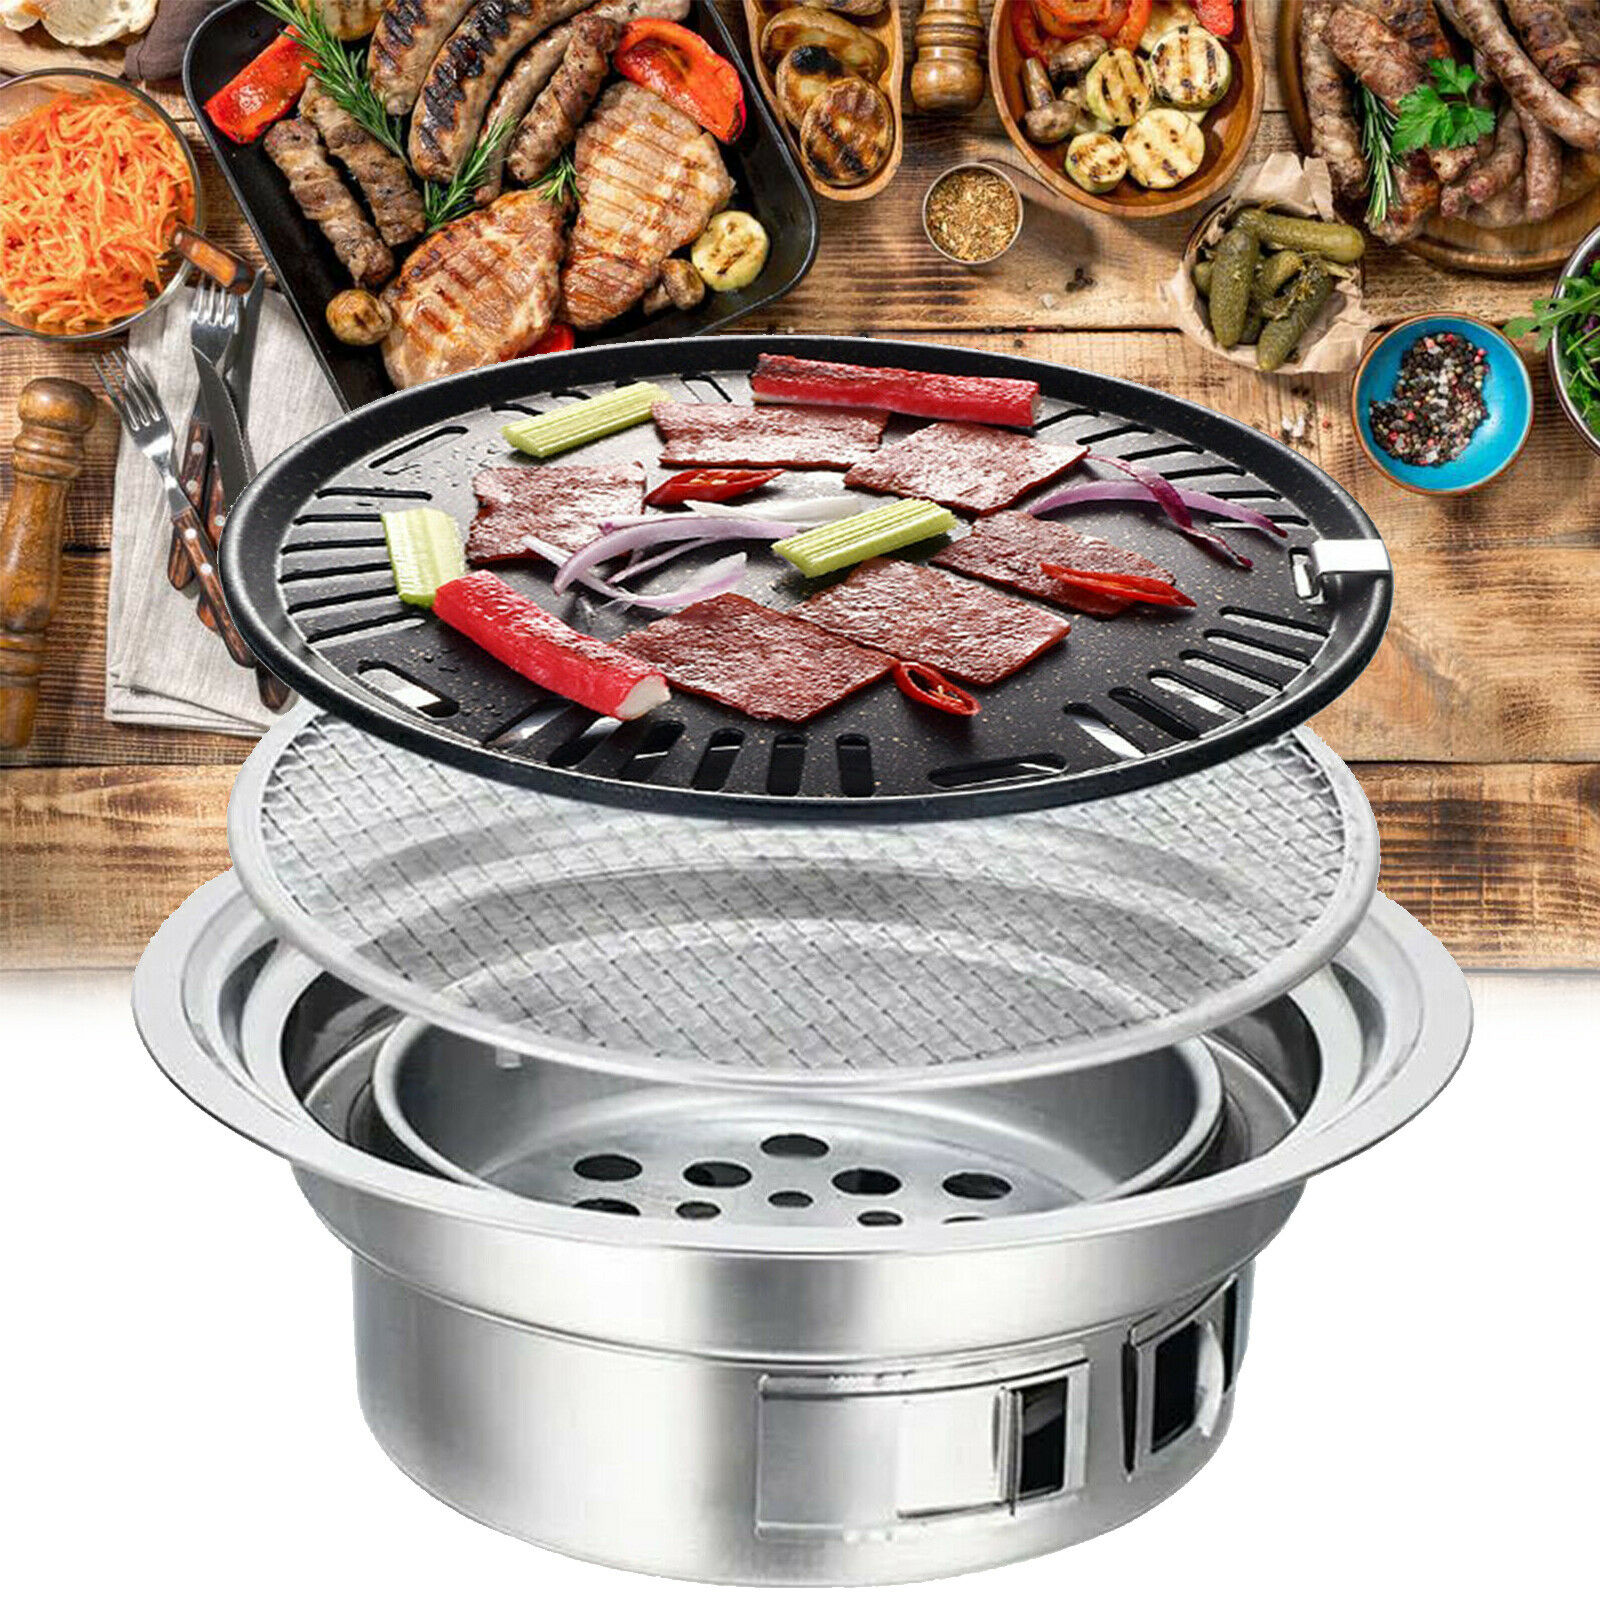 Round Grill Portable Smokeless Non Stick Cooking BBQ Griddle Outdoor & Indoor